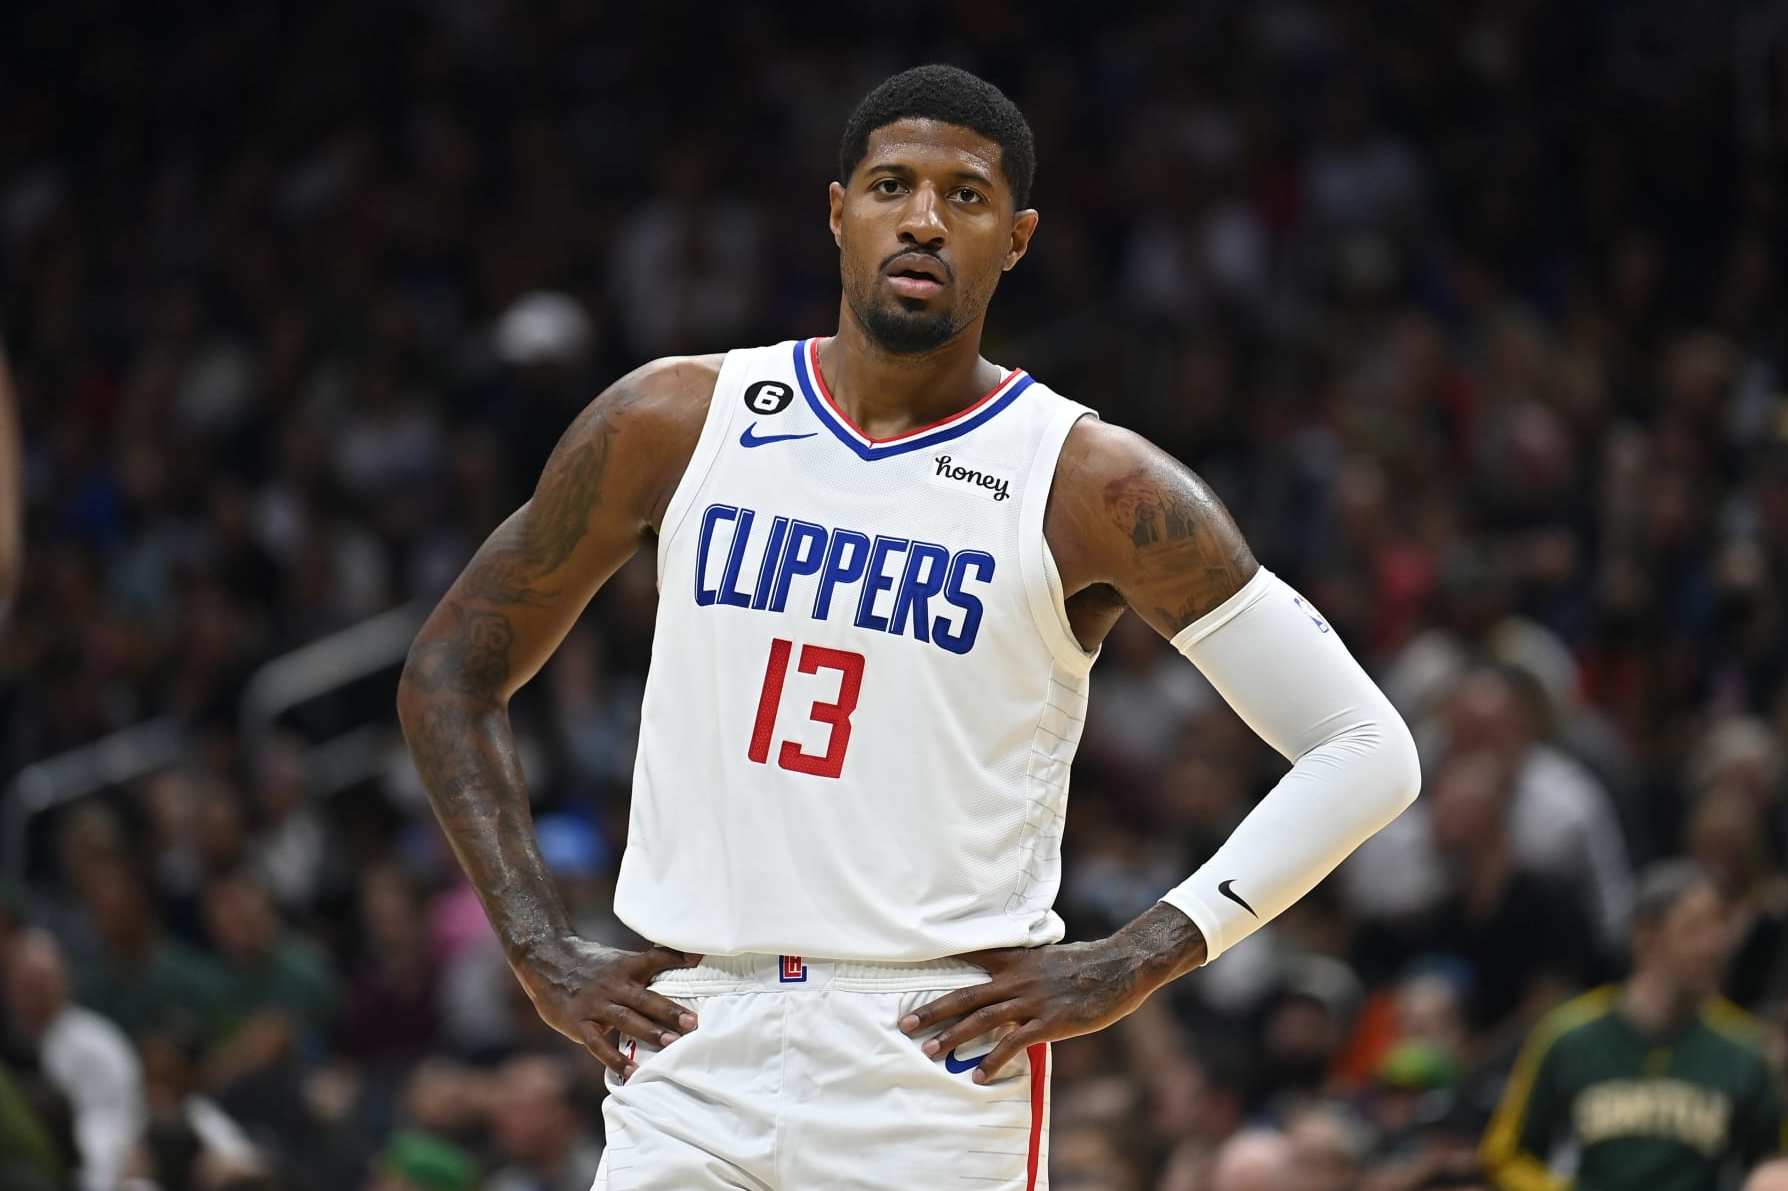 Clippers' Paul George Says He's 'More Focused' Than Ever Ahead